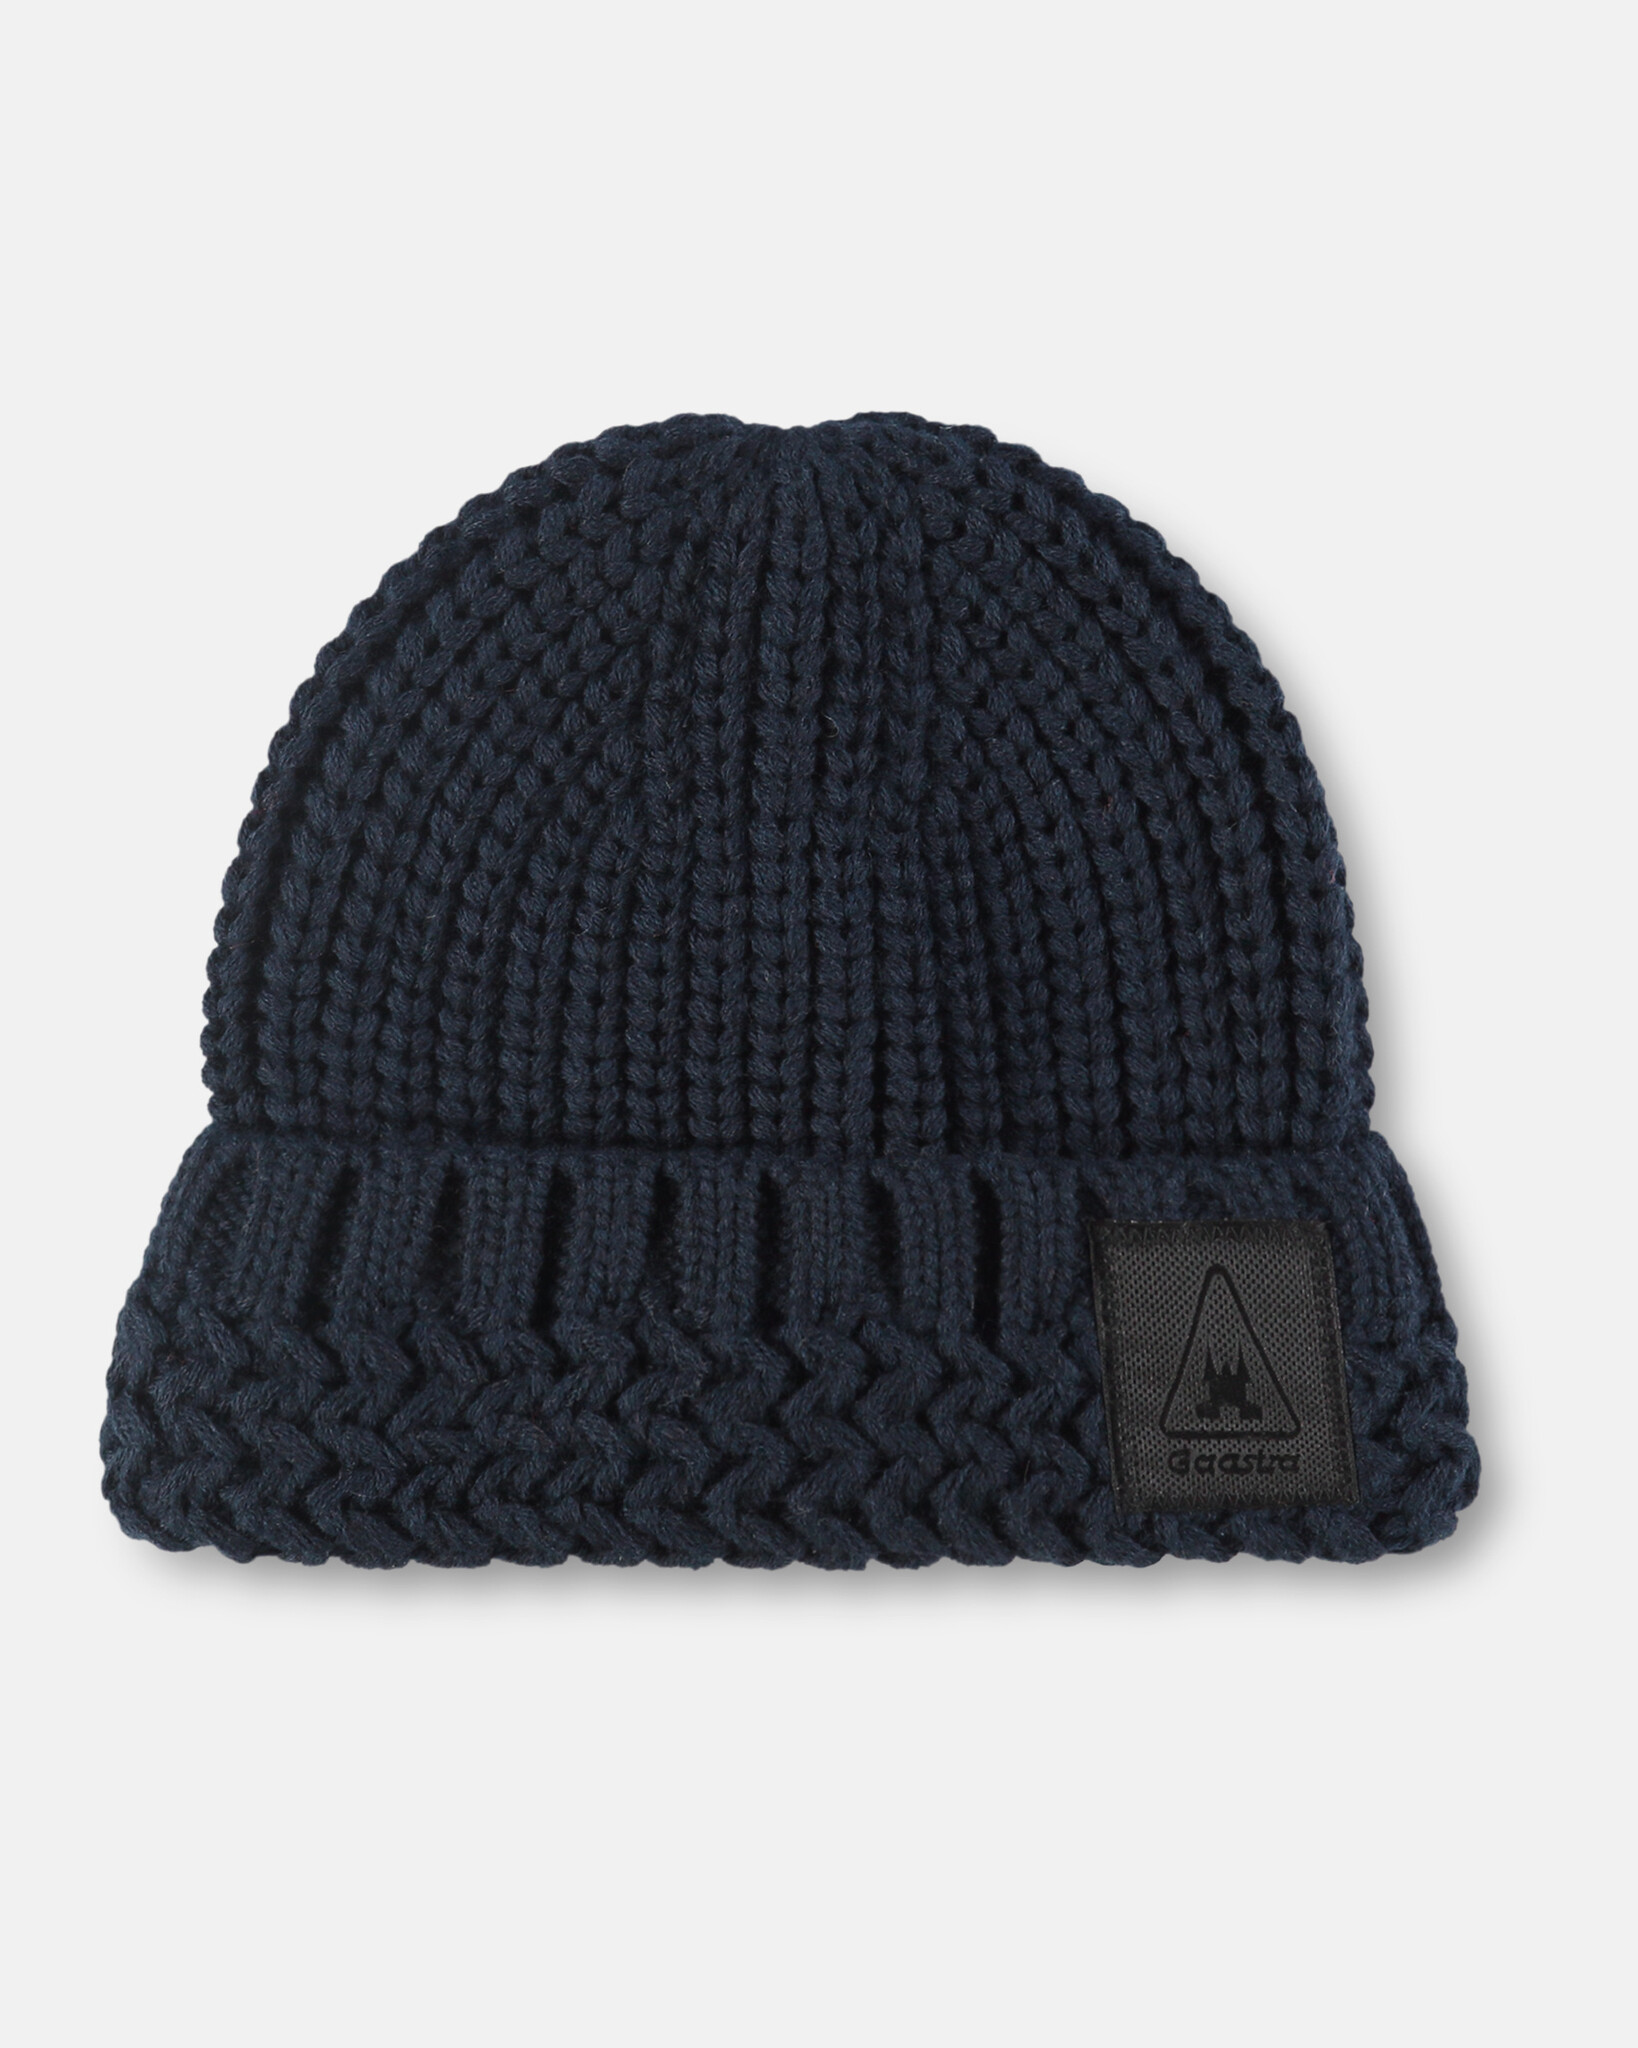 Heavy knitted beanie made from sustainable Polylana® fiber mix with trademark logo